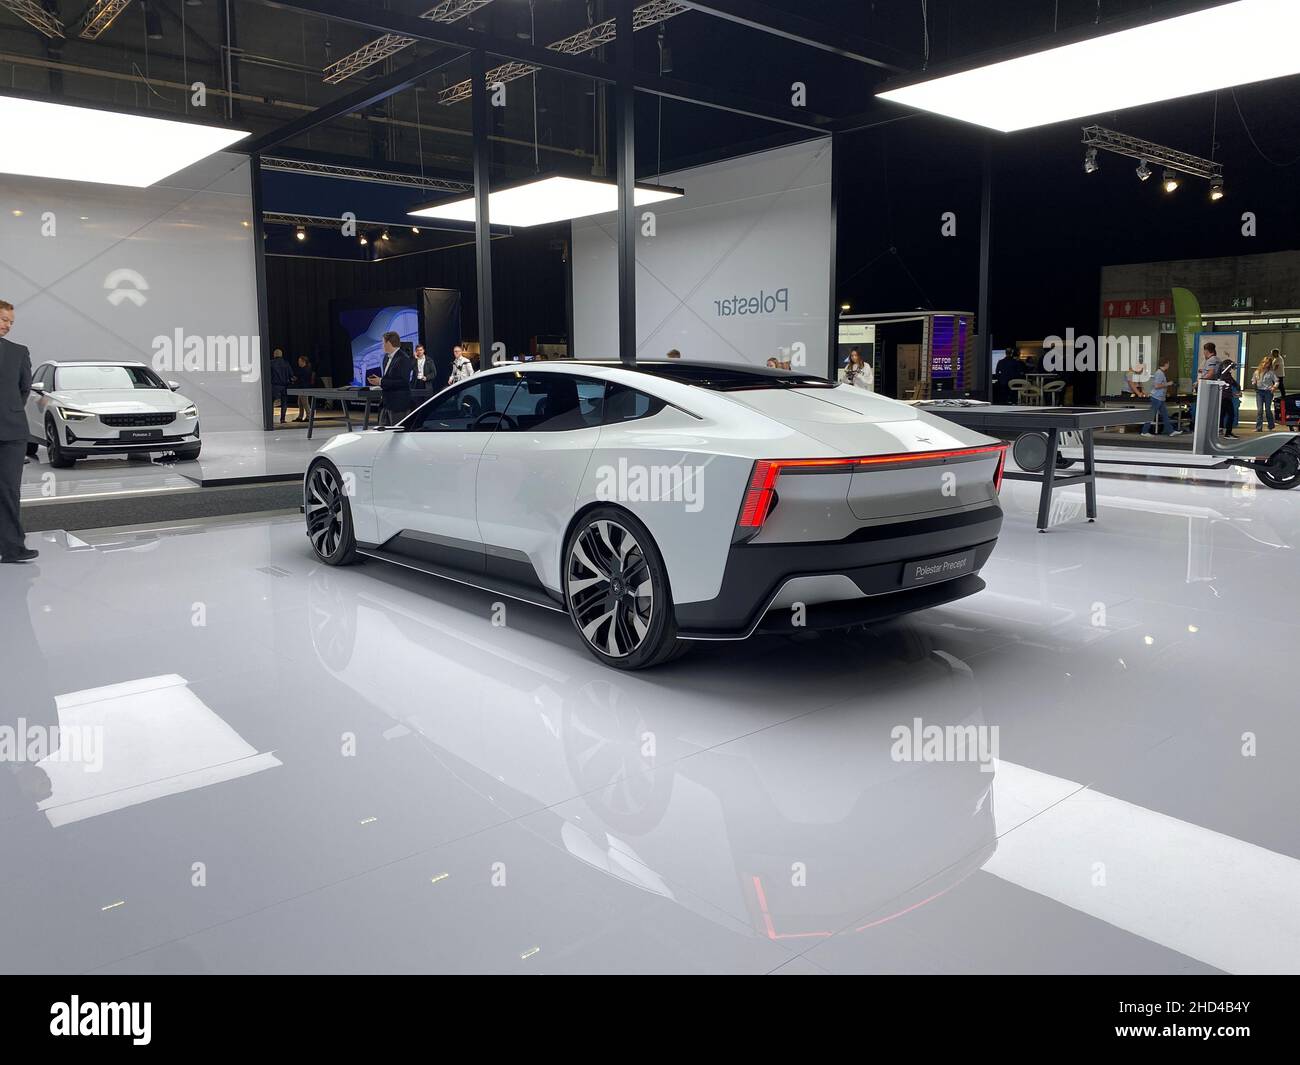 Polestar Precept is displayed at a car show in Oslo, Norway, November 10, 2021. Picture taken November 10, 2021. REUTERS/Victoria Klesty Stock Photo